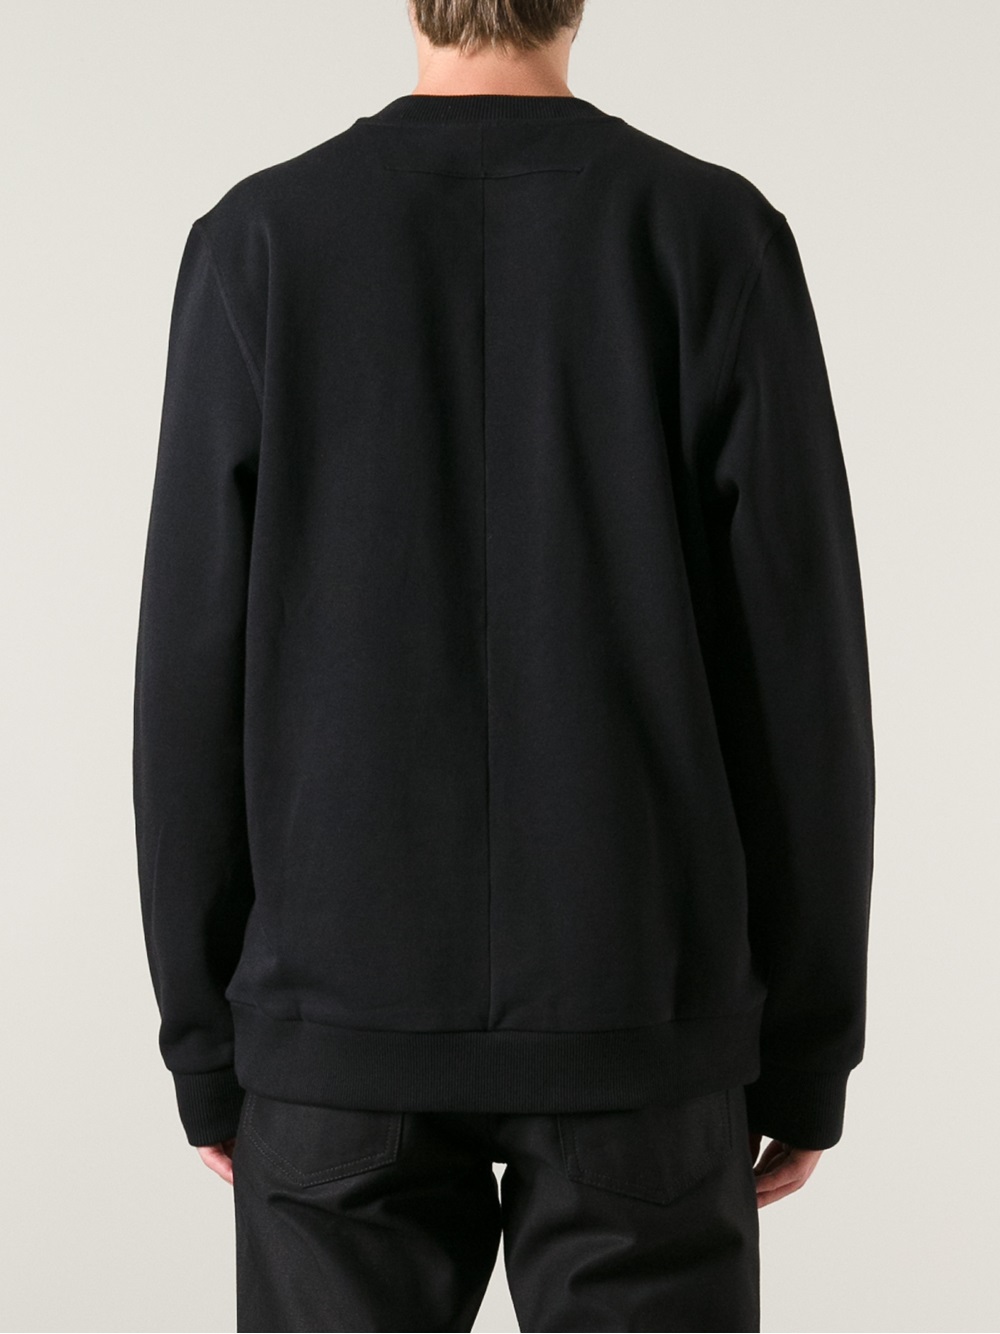 Lyst - Givenchy Printed Sweatshirt in Black for Men